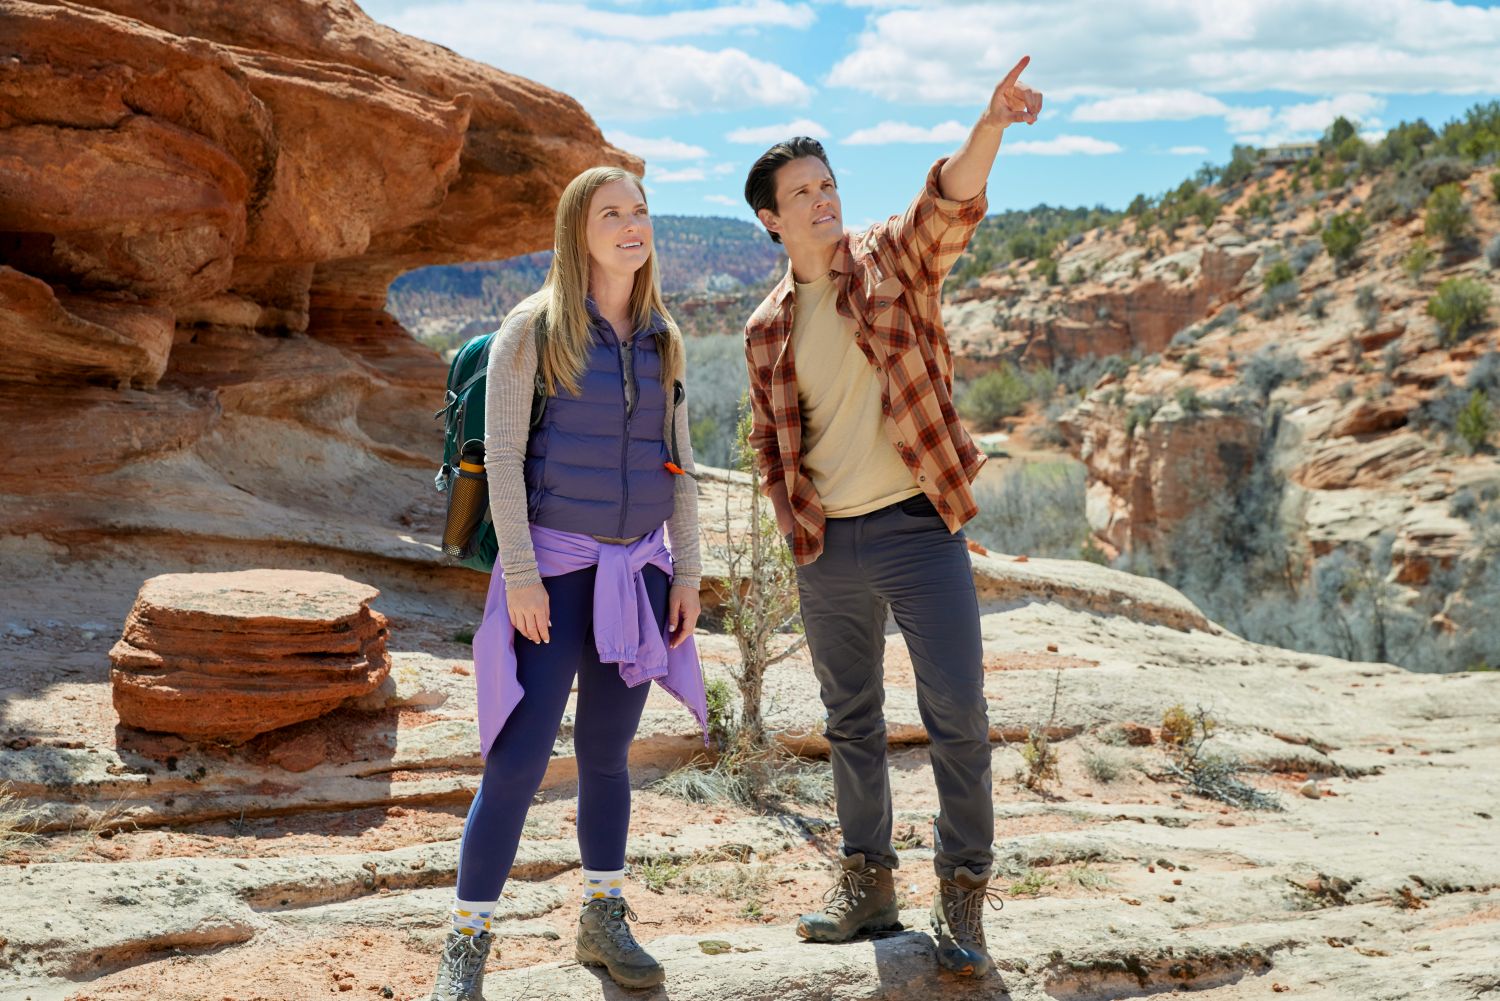 Cindy Busby and David Gridley in Love in Zion: A National Park Romance